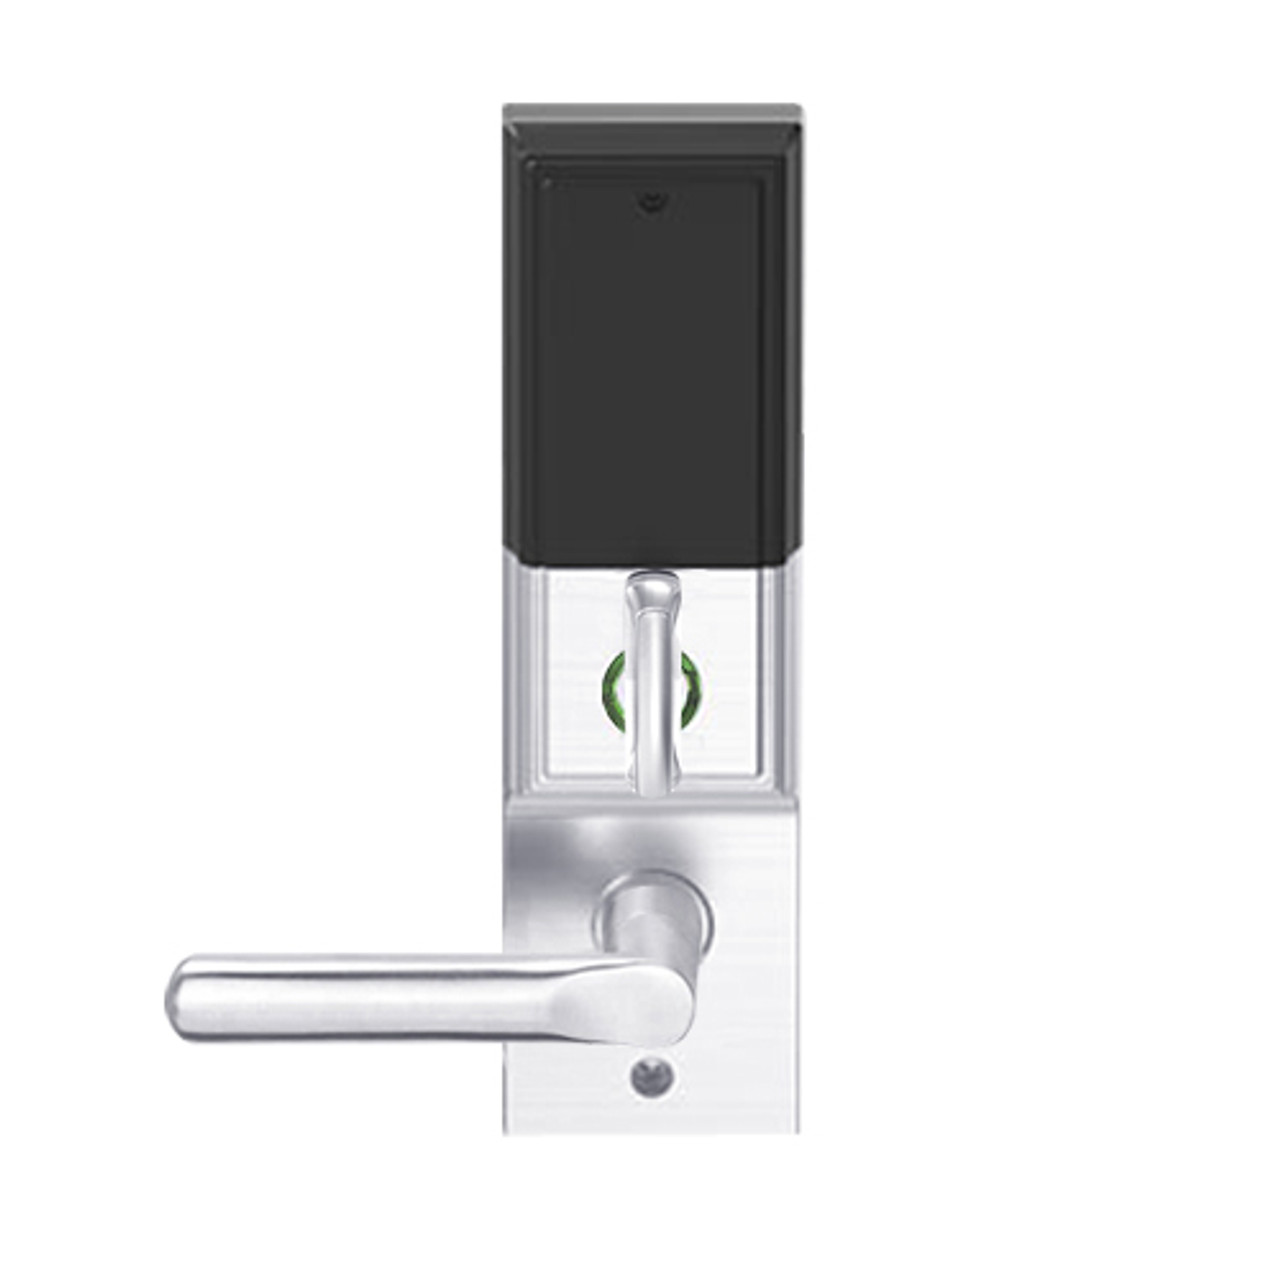 LEMD-ADD-P-18-625 Schlage Privacy/Apartment Wireless Addison Mortise Deadbolt Lock with LED and 18 Lever in Bright Chrome